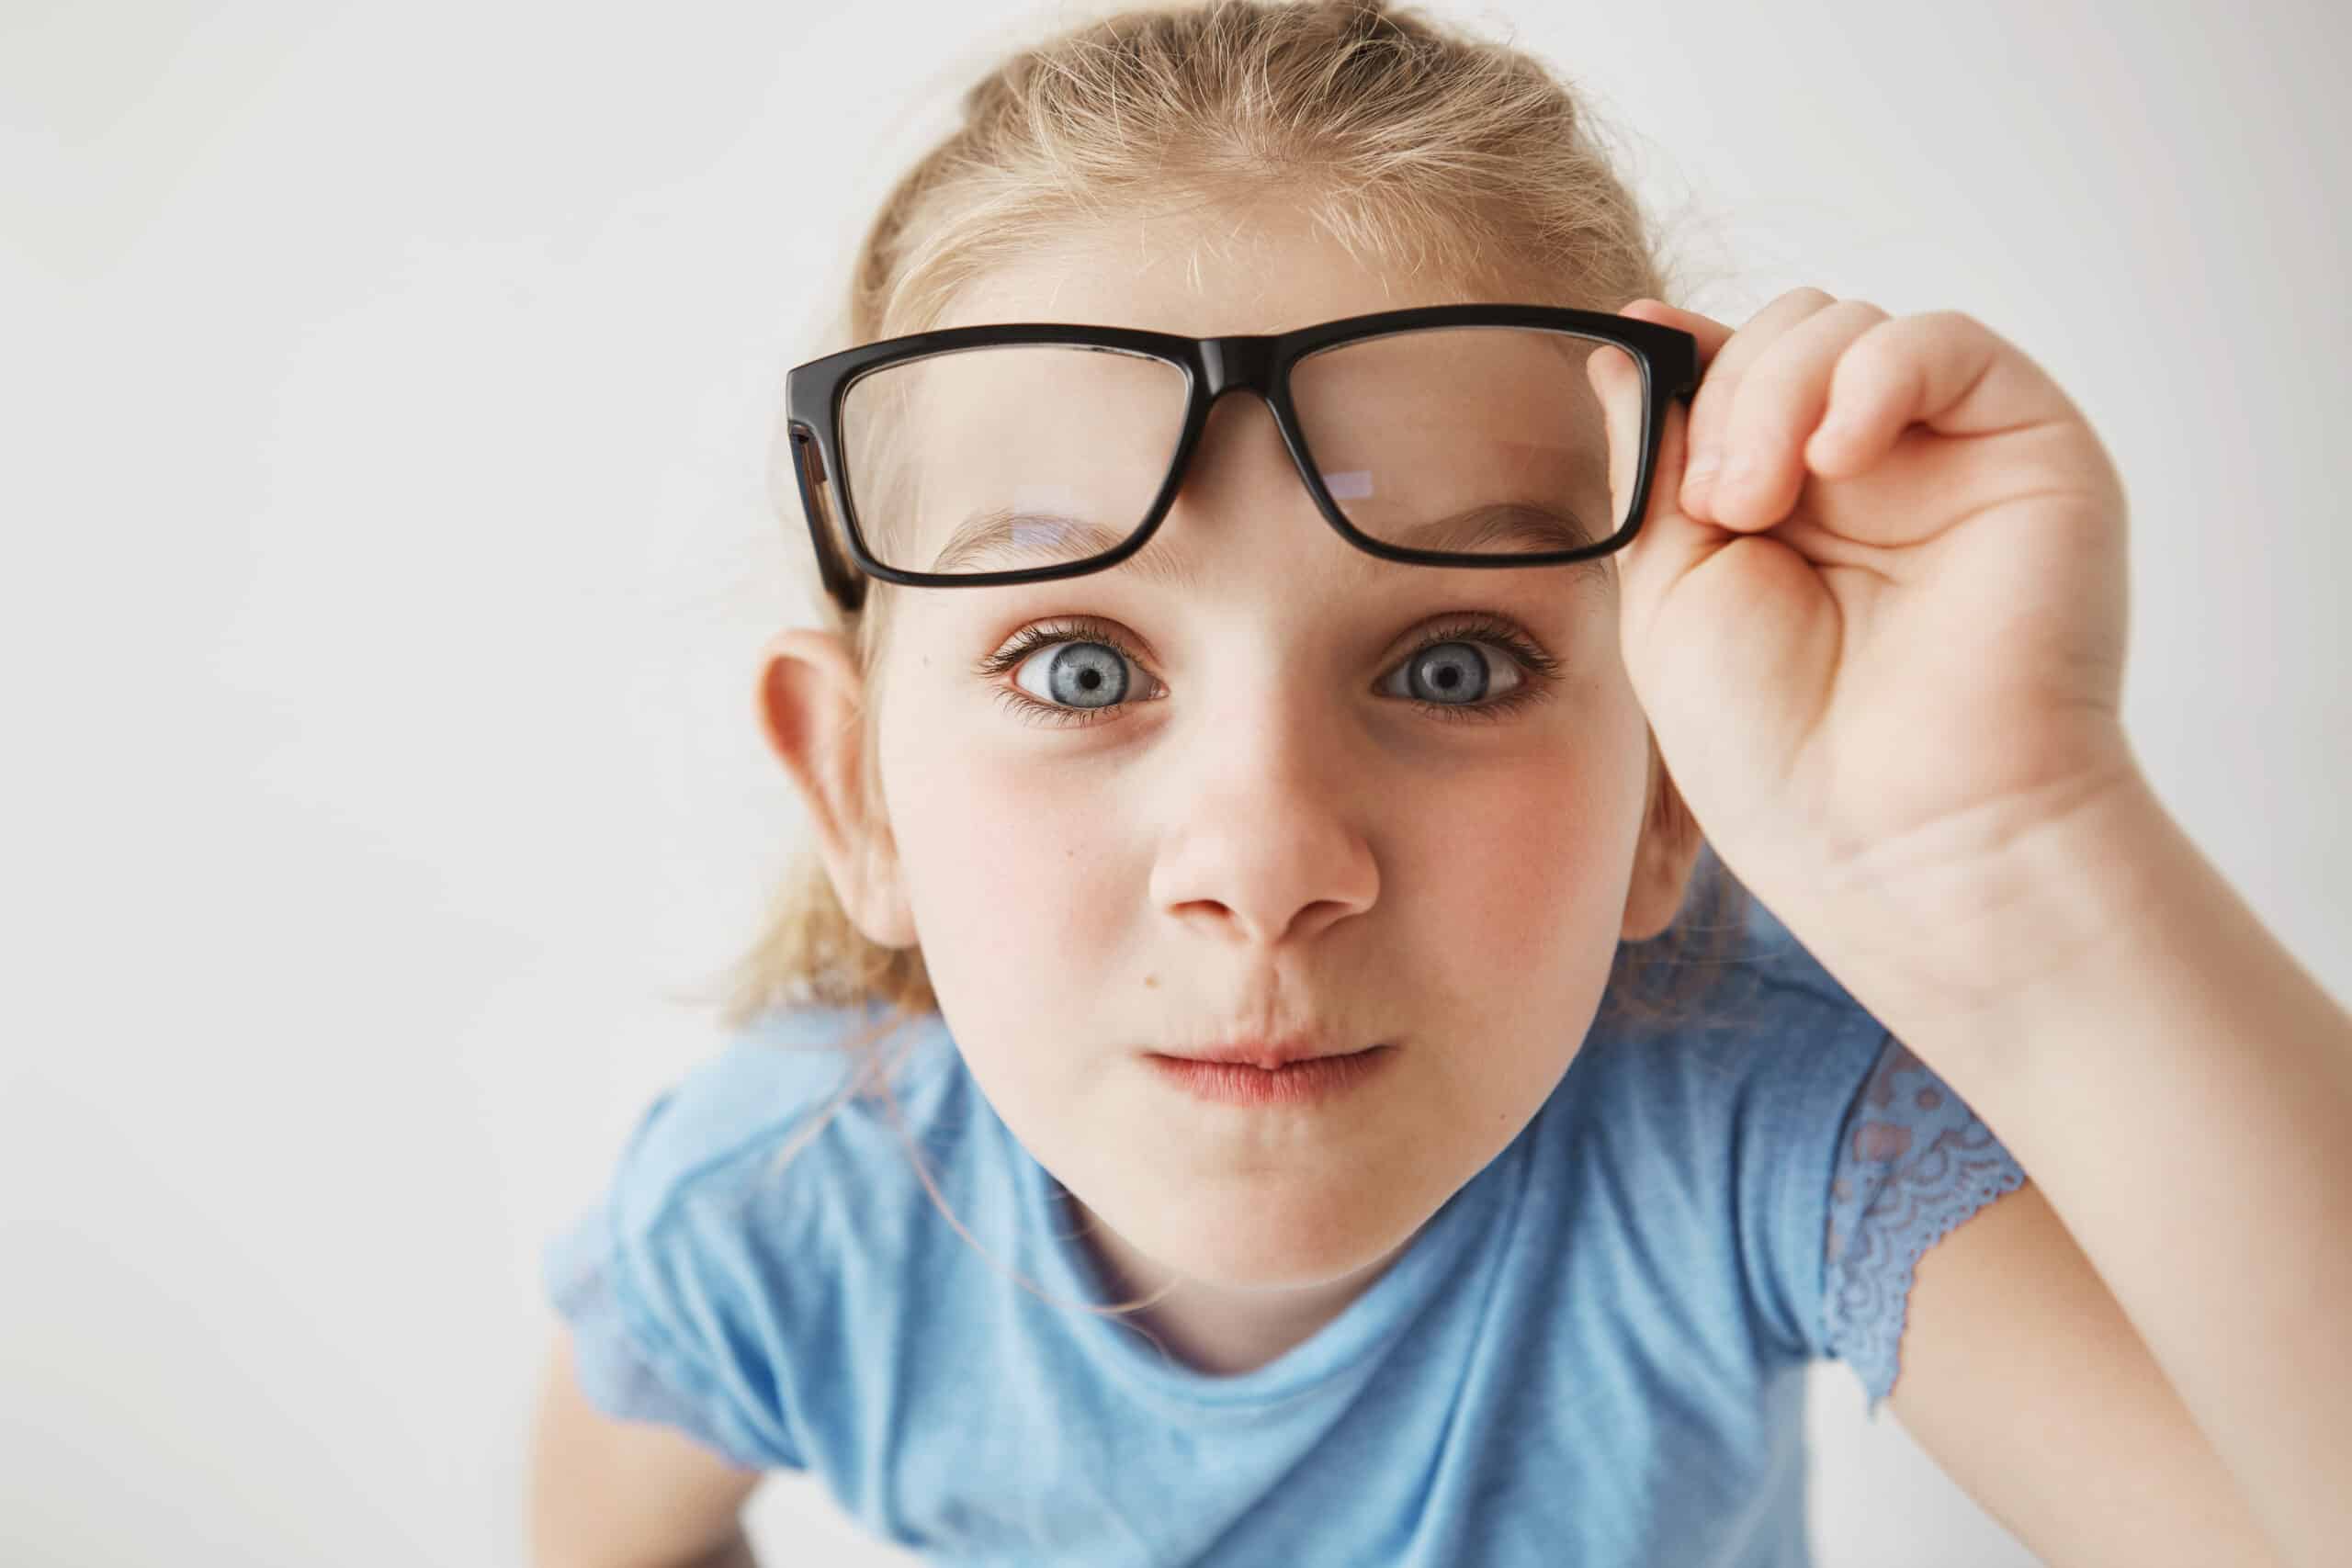 Why Do So Many Kids Need Glasses Now?